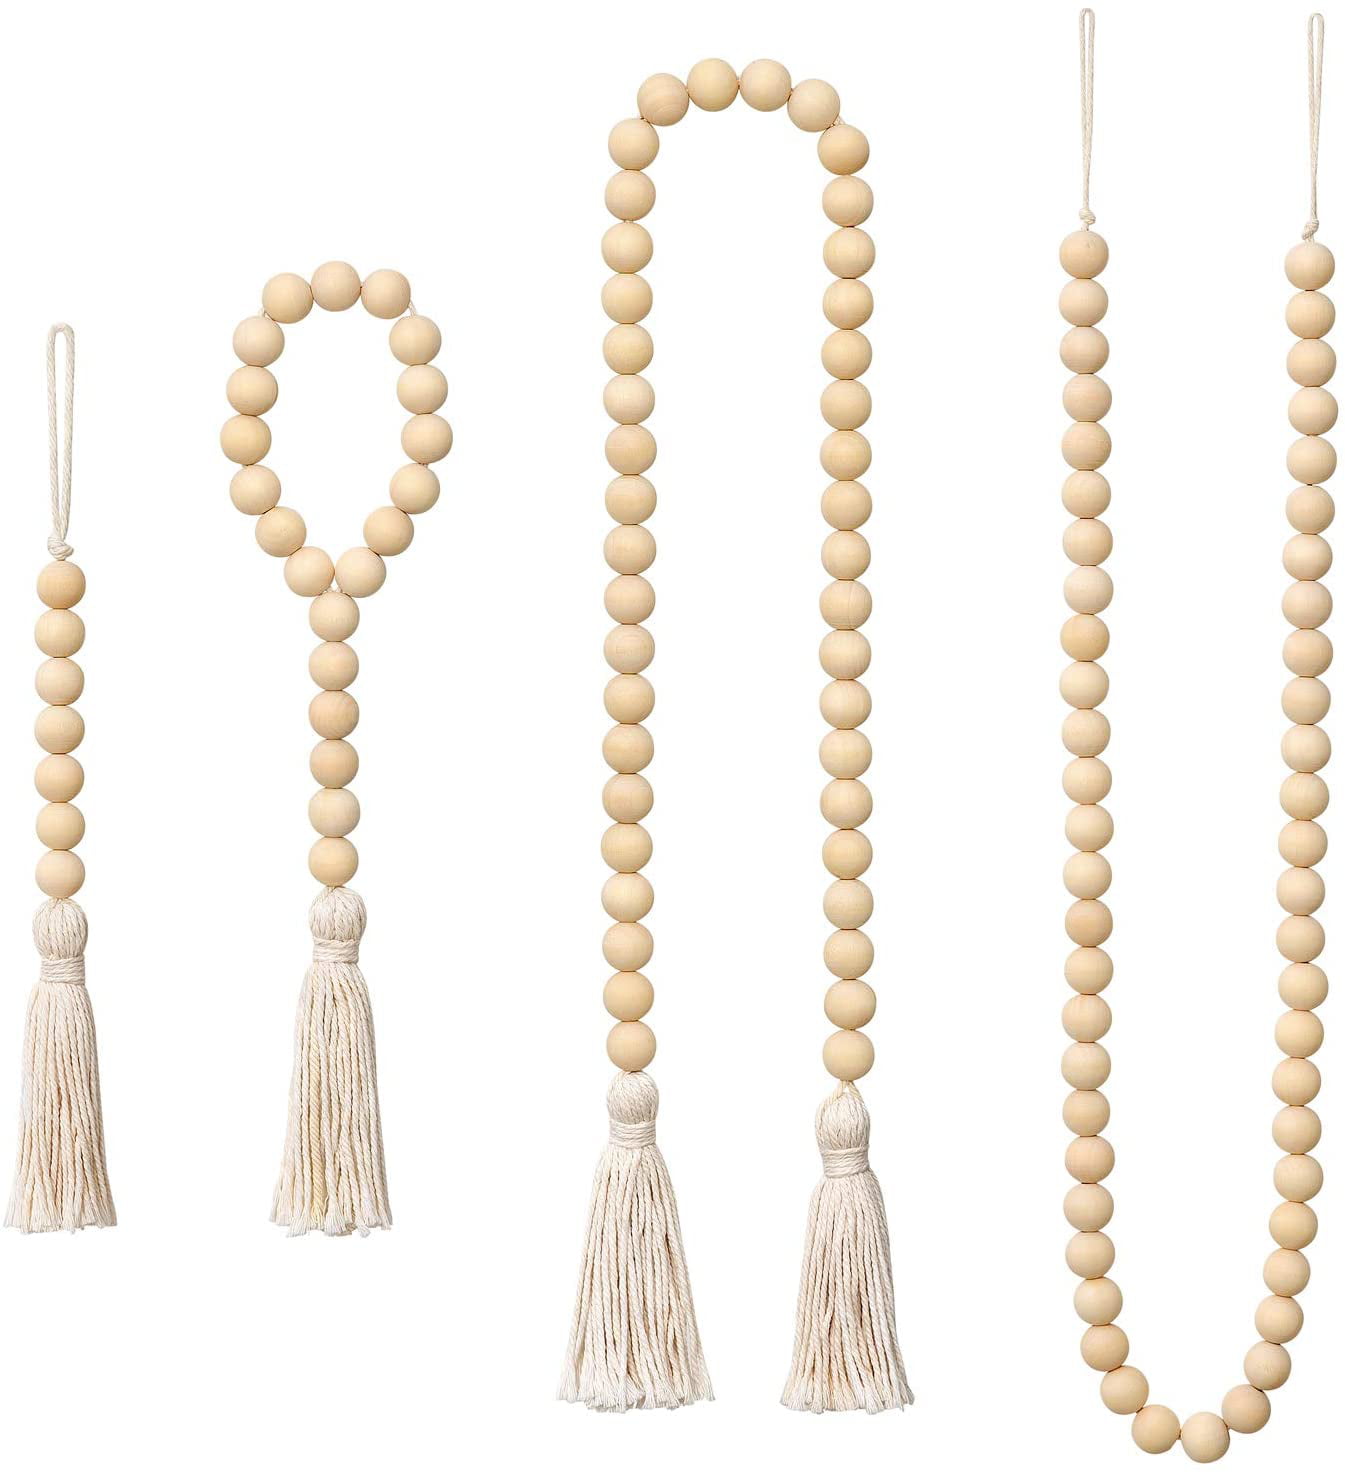 Wooden Beads String Garland with Tassels for Wedding Party Holiday Decoration 